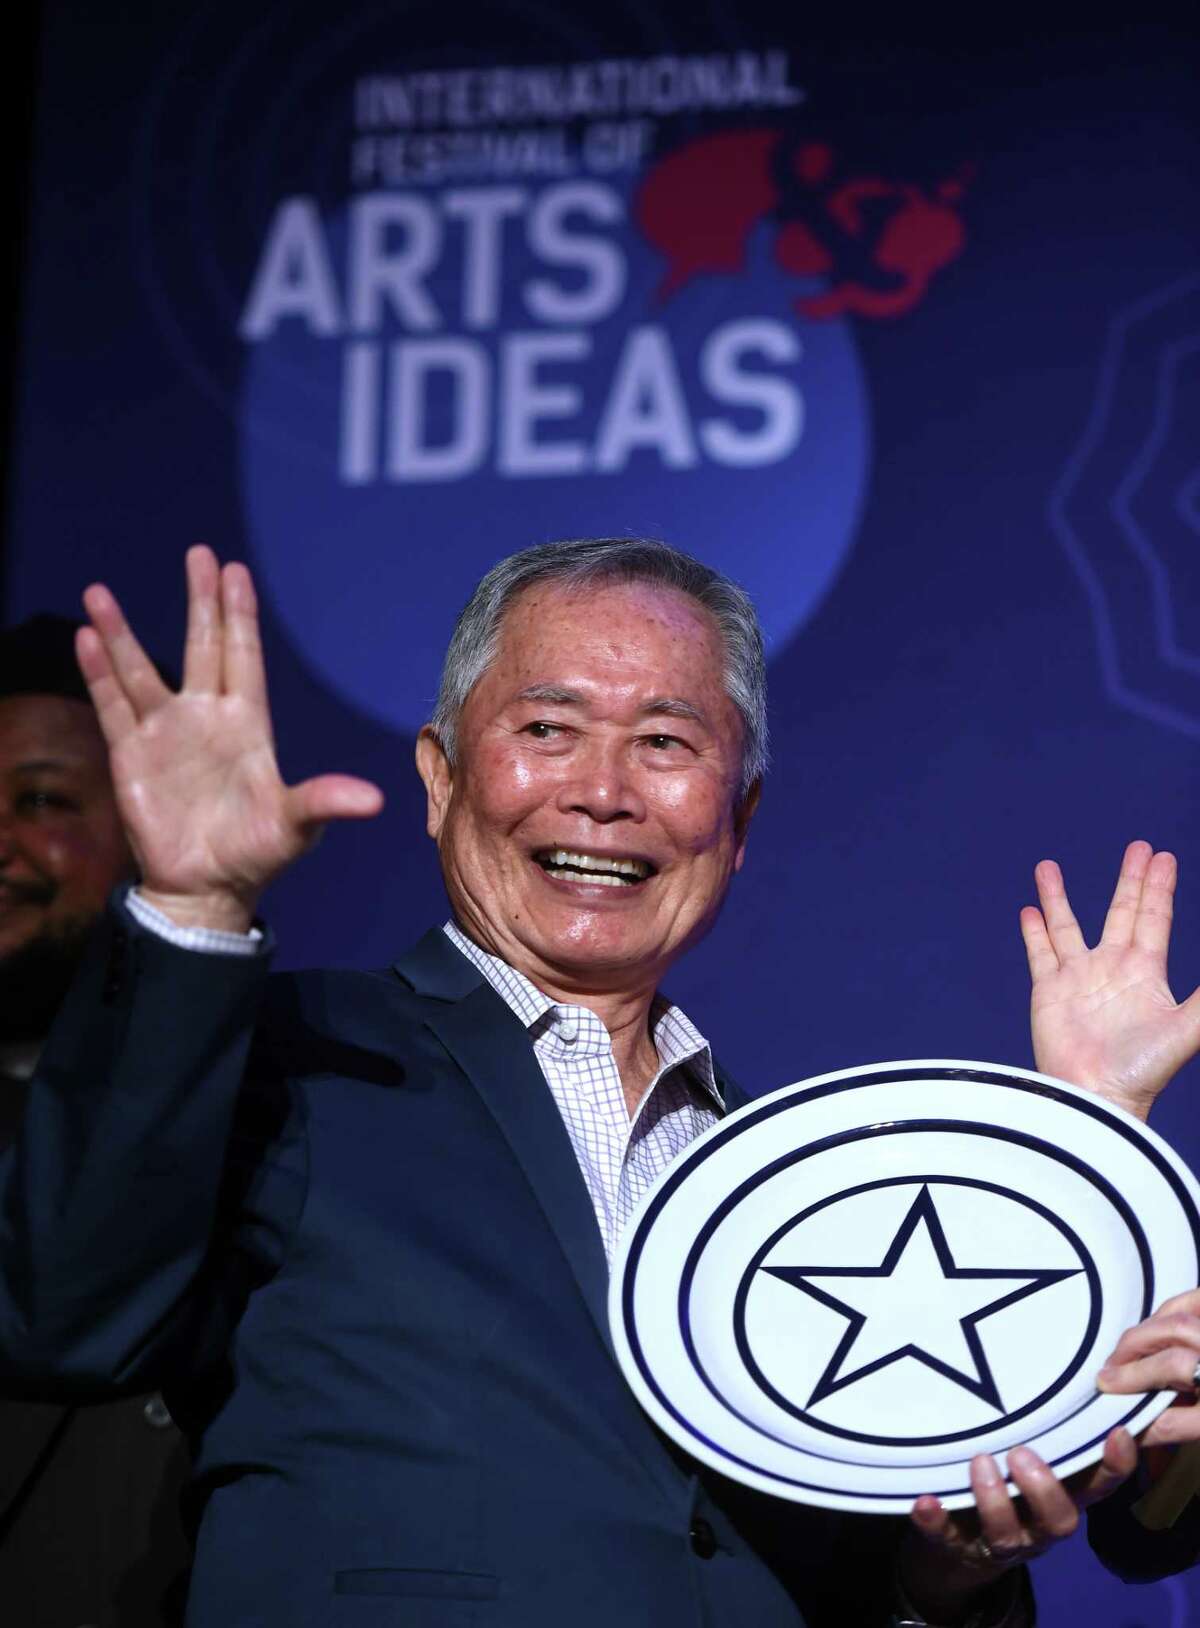 Actor and activist George Takei flashes the Vulcan salute after receiving the Visionary Leadership Award by the International Festival of Arts & Ideas at the Omni New Haven Hotel at Yale on February 18, 2020. The award honors a person whose work impacts the world.